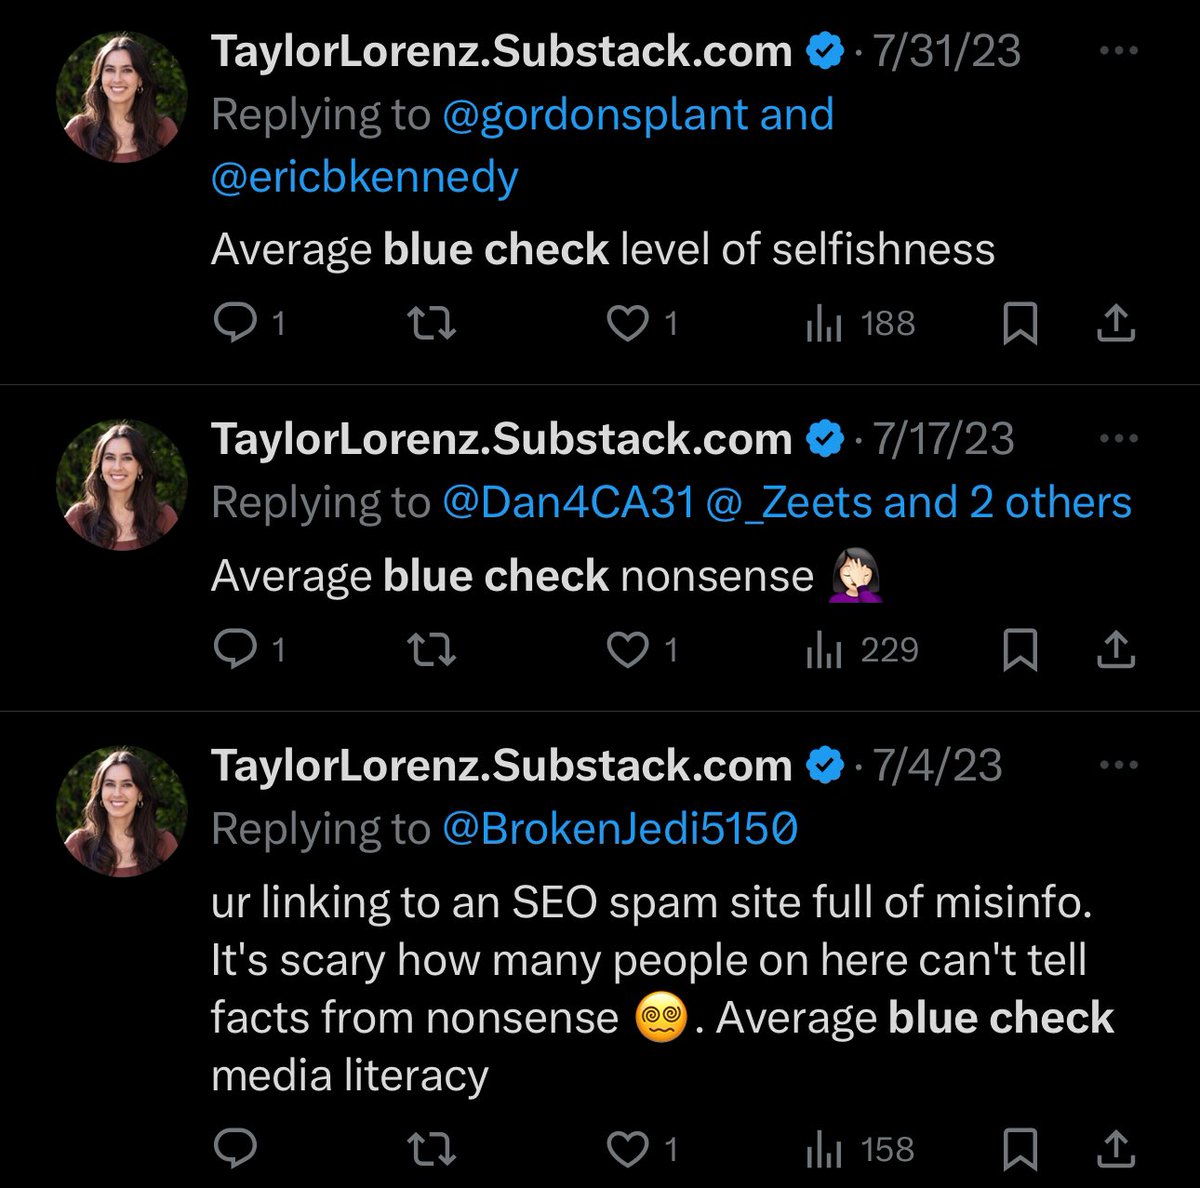 Since Elon took away the ability to hide blue checks, I’m over here rolling at Taylor Lorenz’s past tweets ridiculing people who paid for X Premium while she was hiding her check the entire time. You’ll never convince me that Elon didn’t do all of this on purpose. Mental chess.